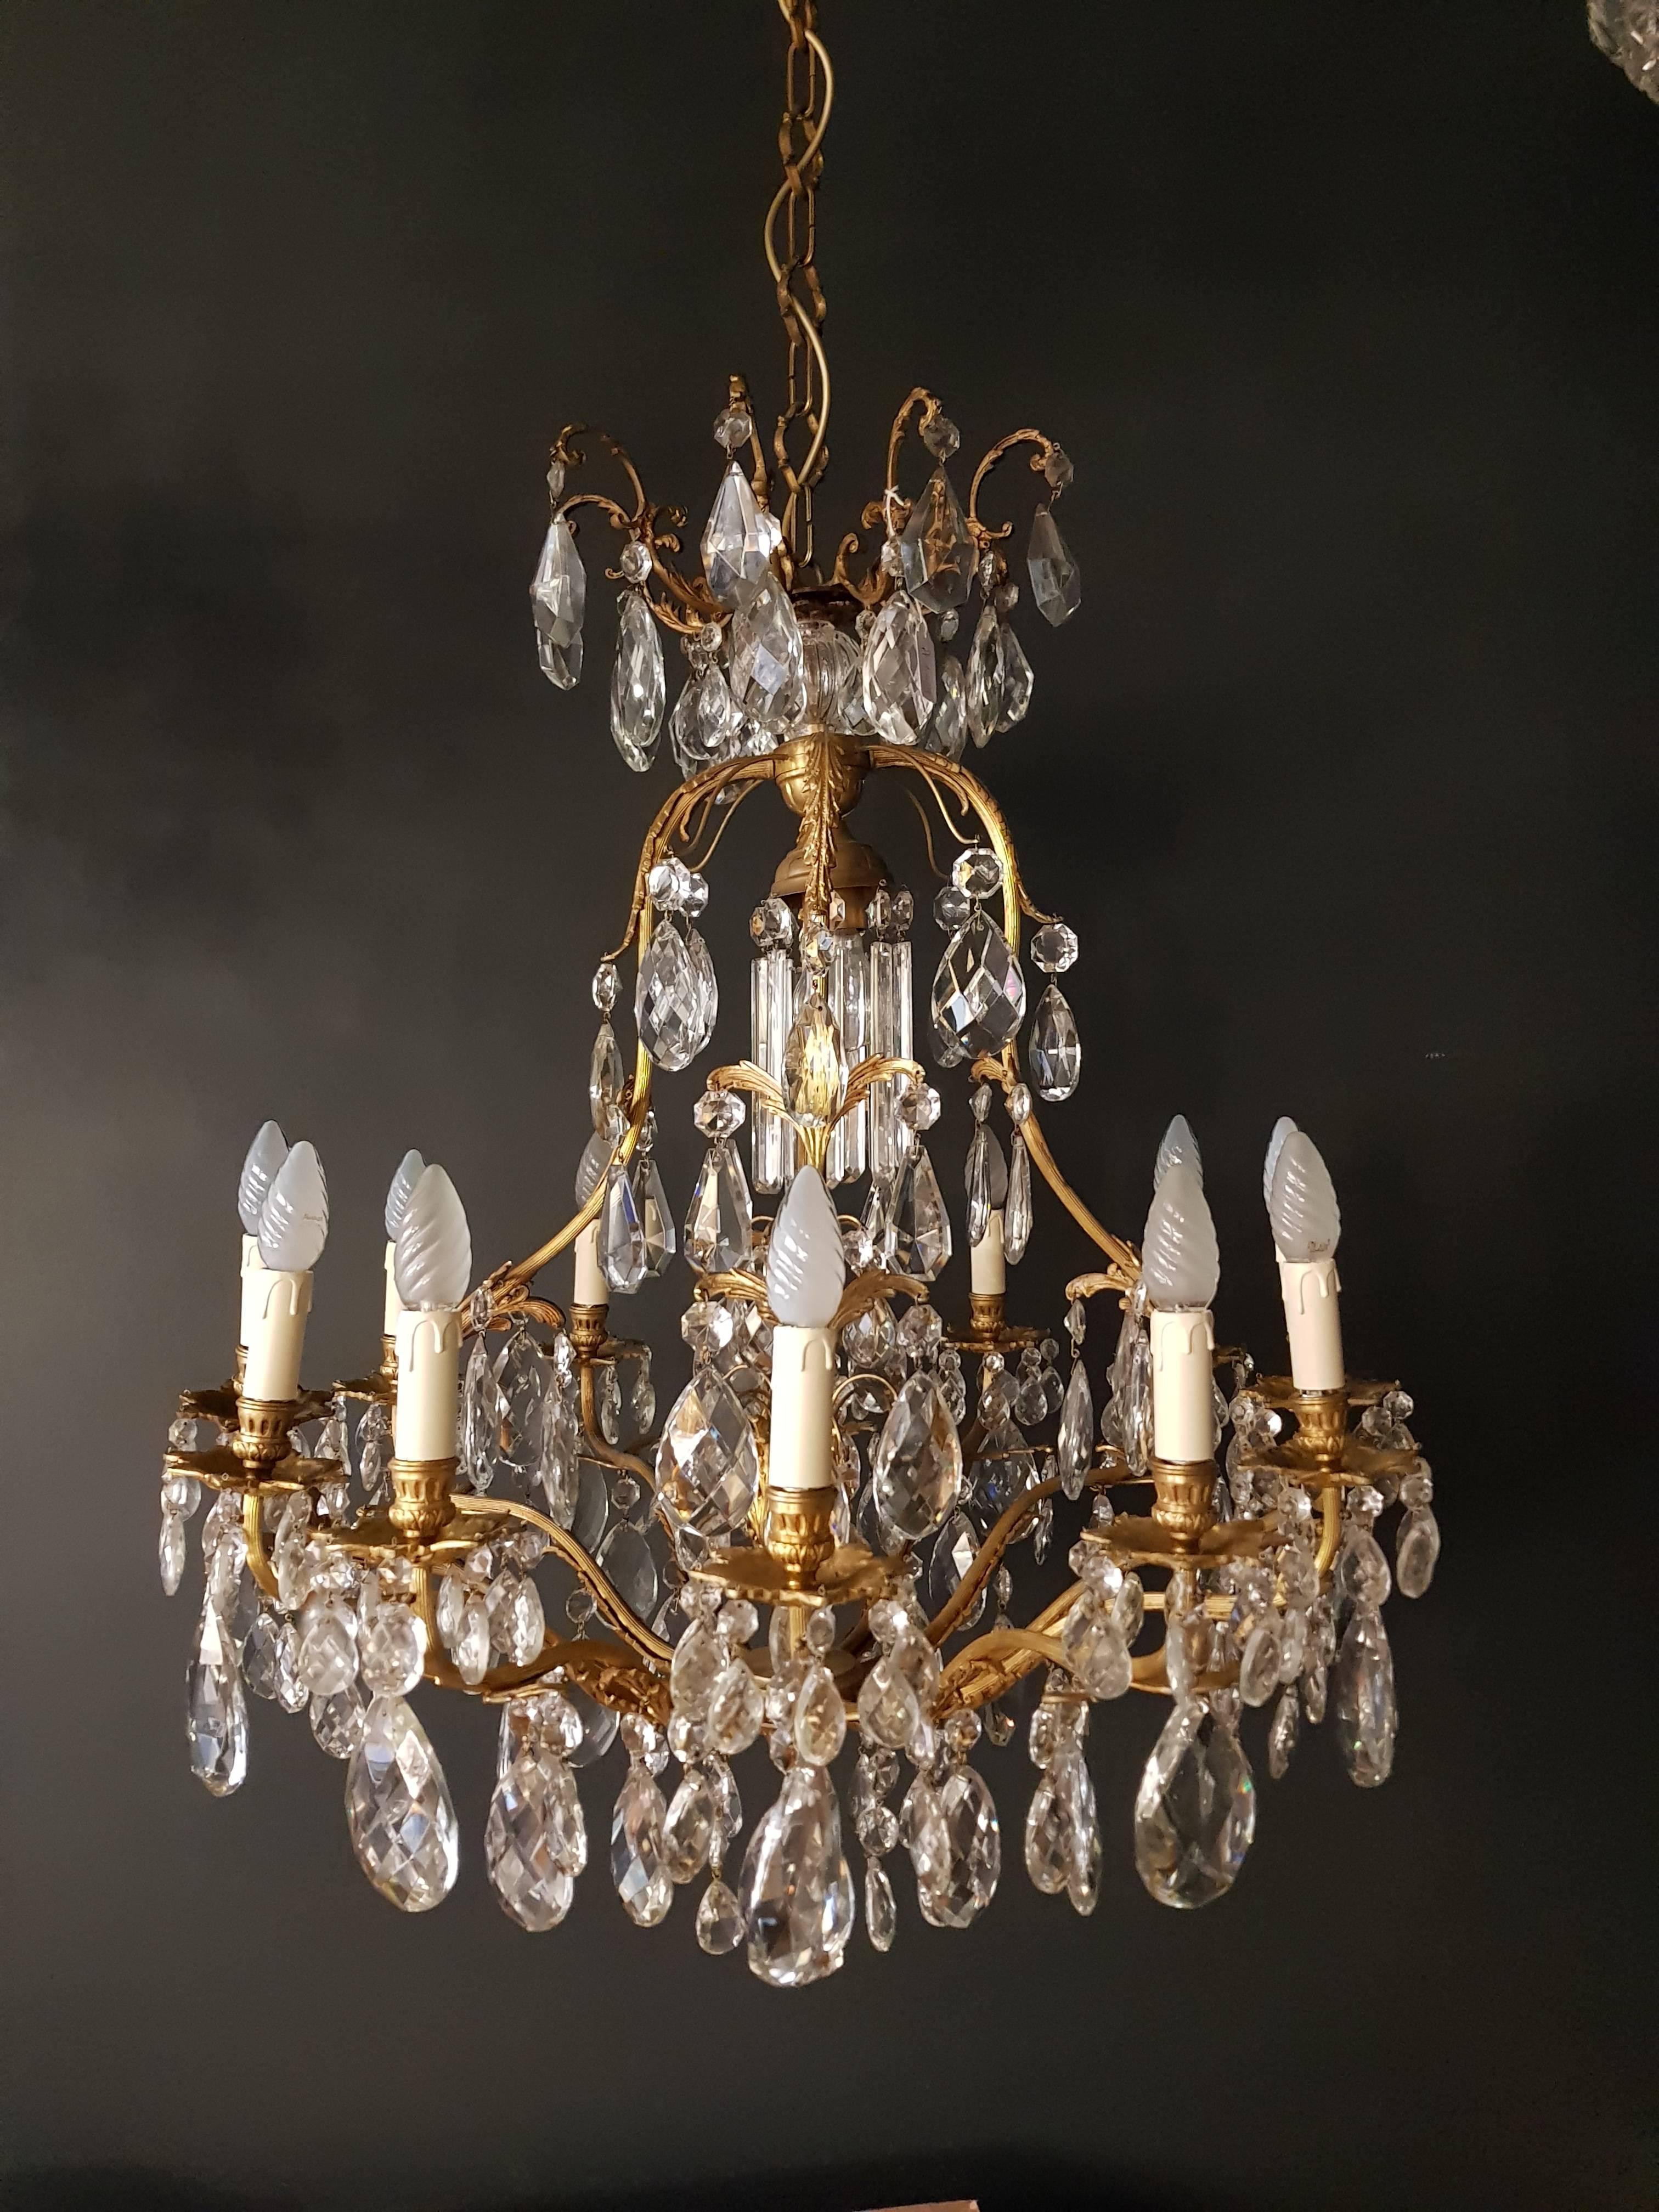 Hand-Woven Crystal Chandelier Antique Ceiling Lamp Lustre